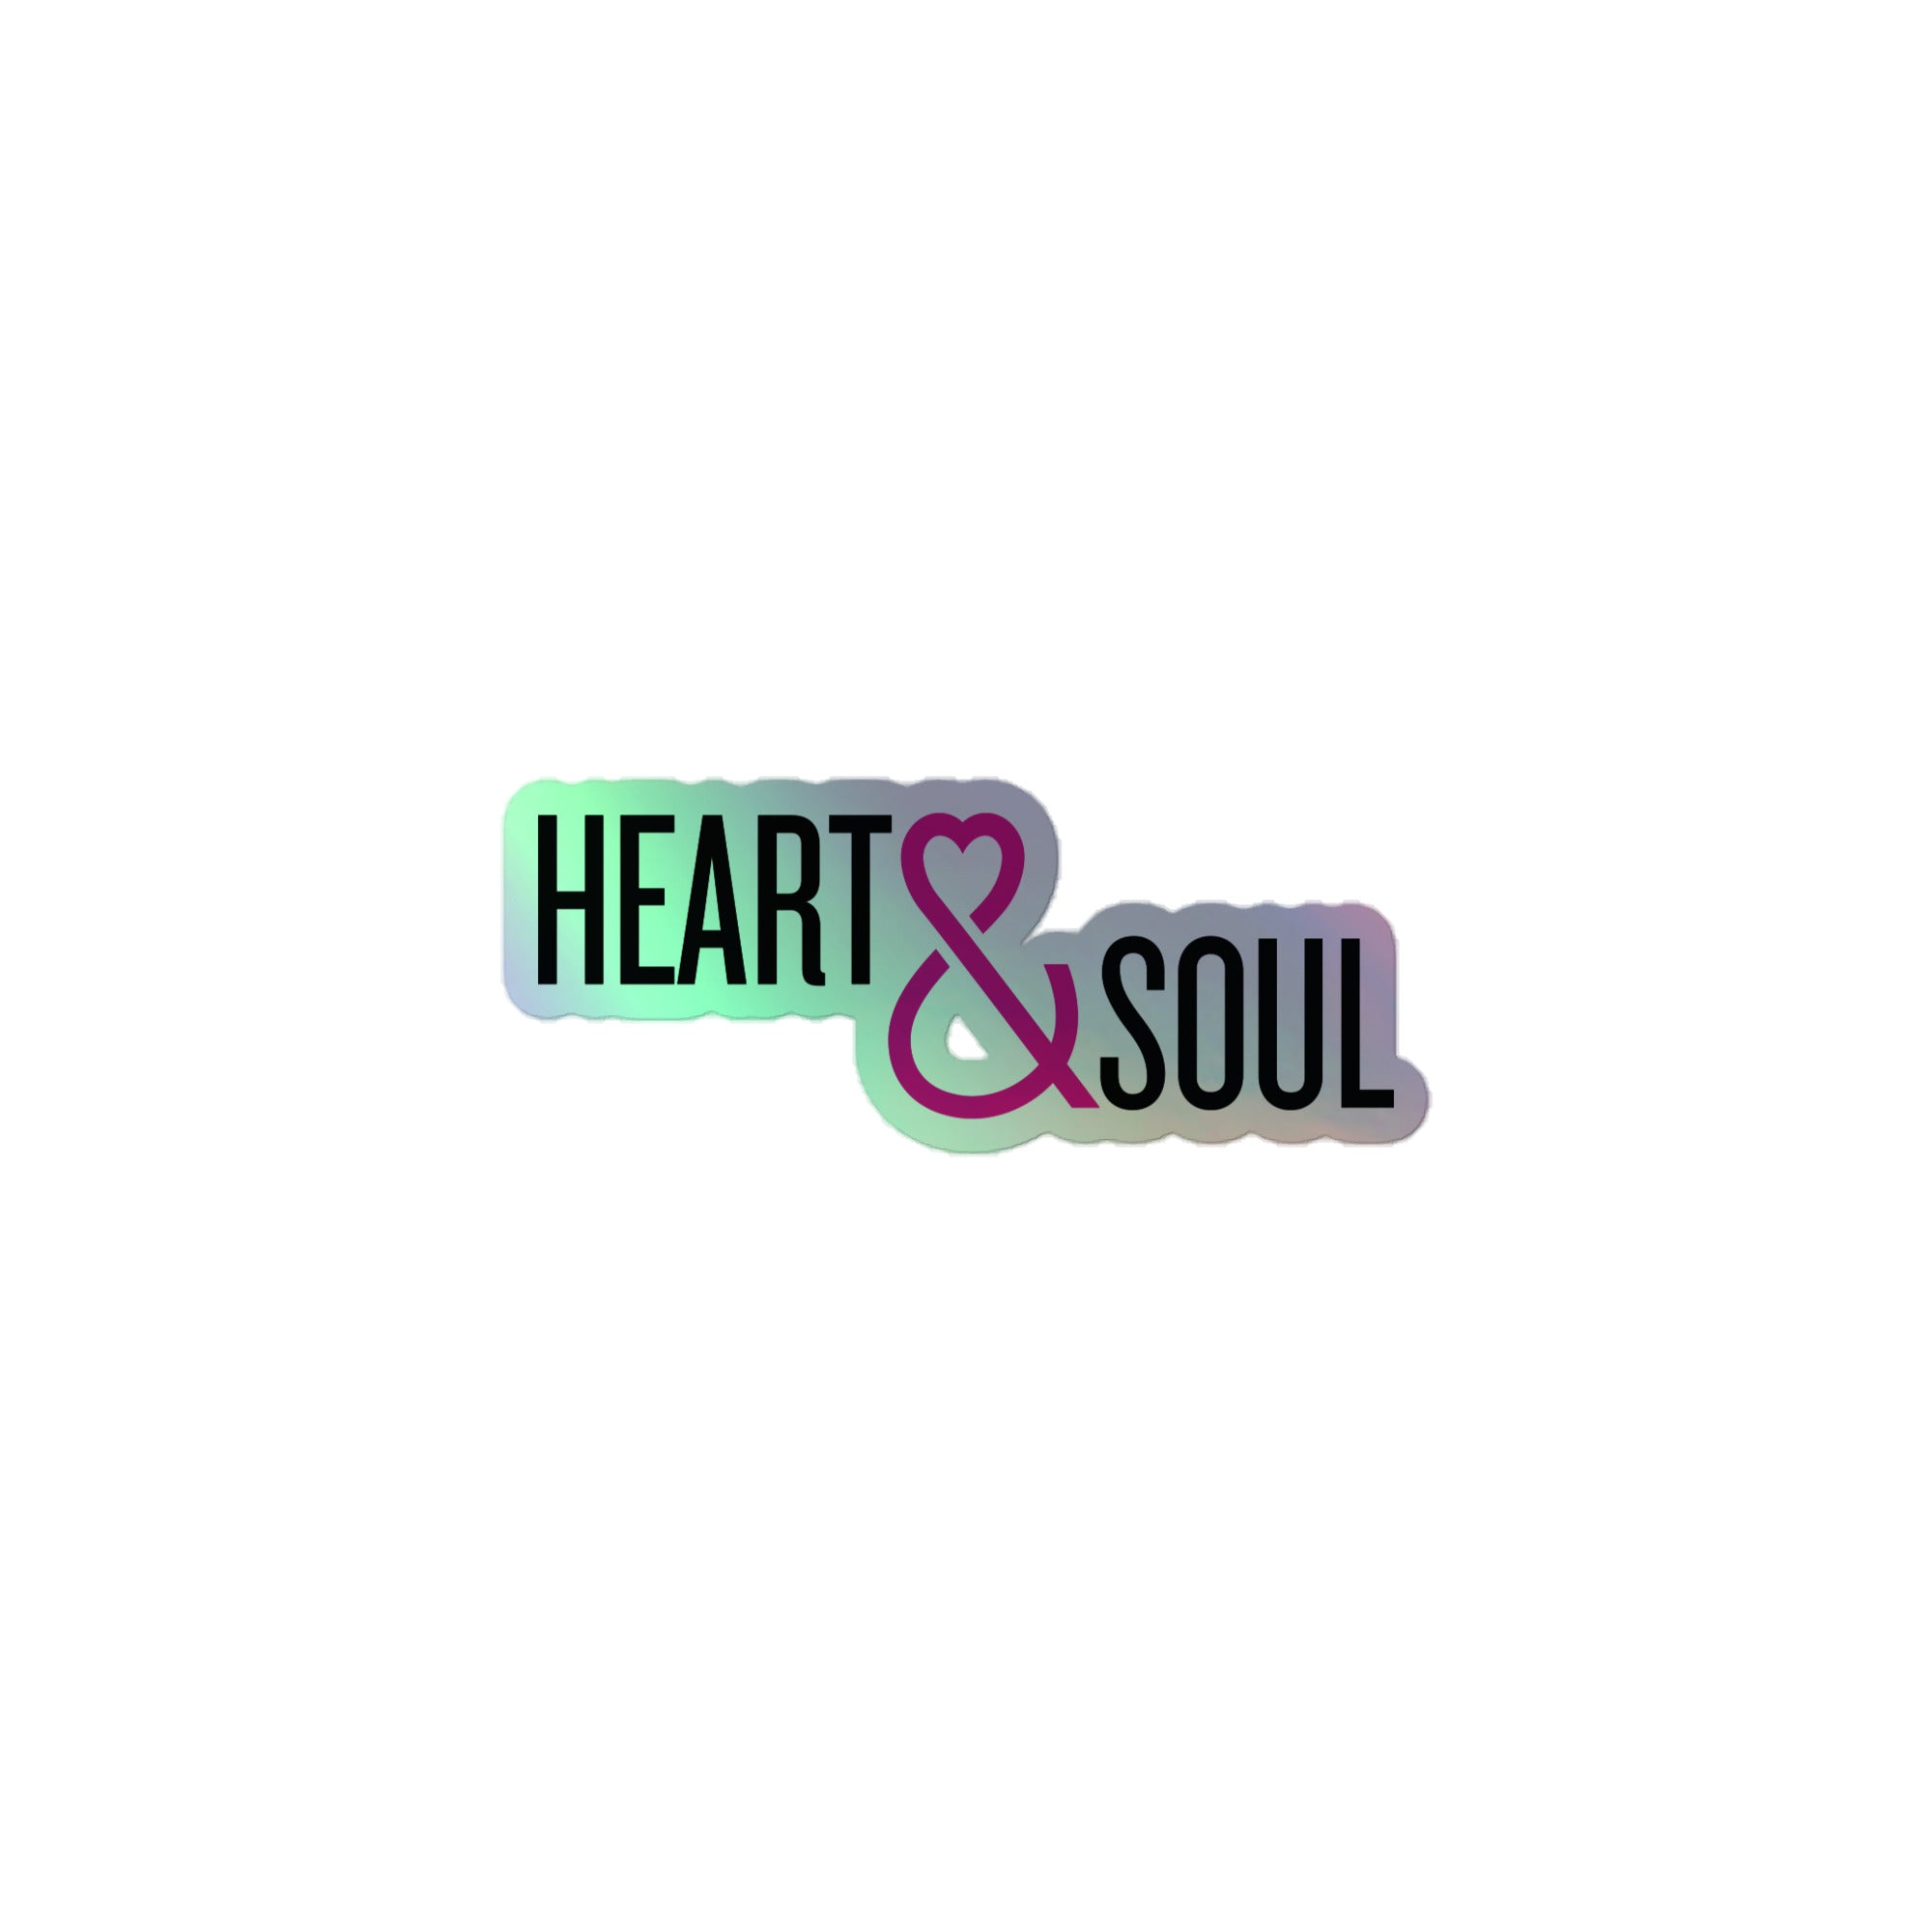 Heart & Soul: Holographic Sticker